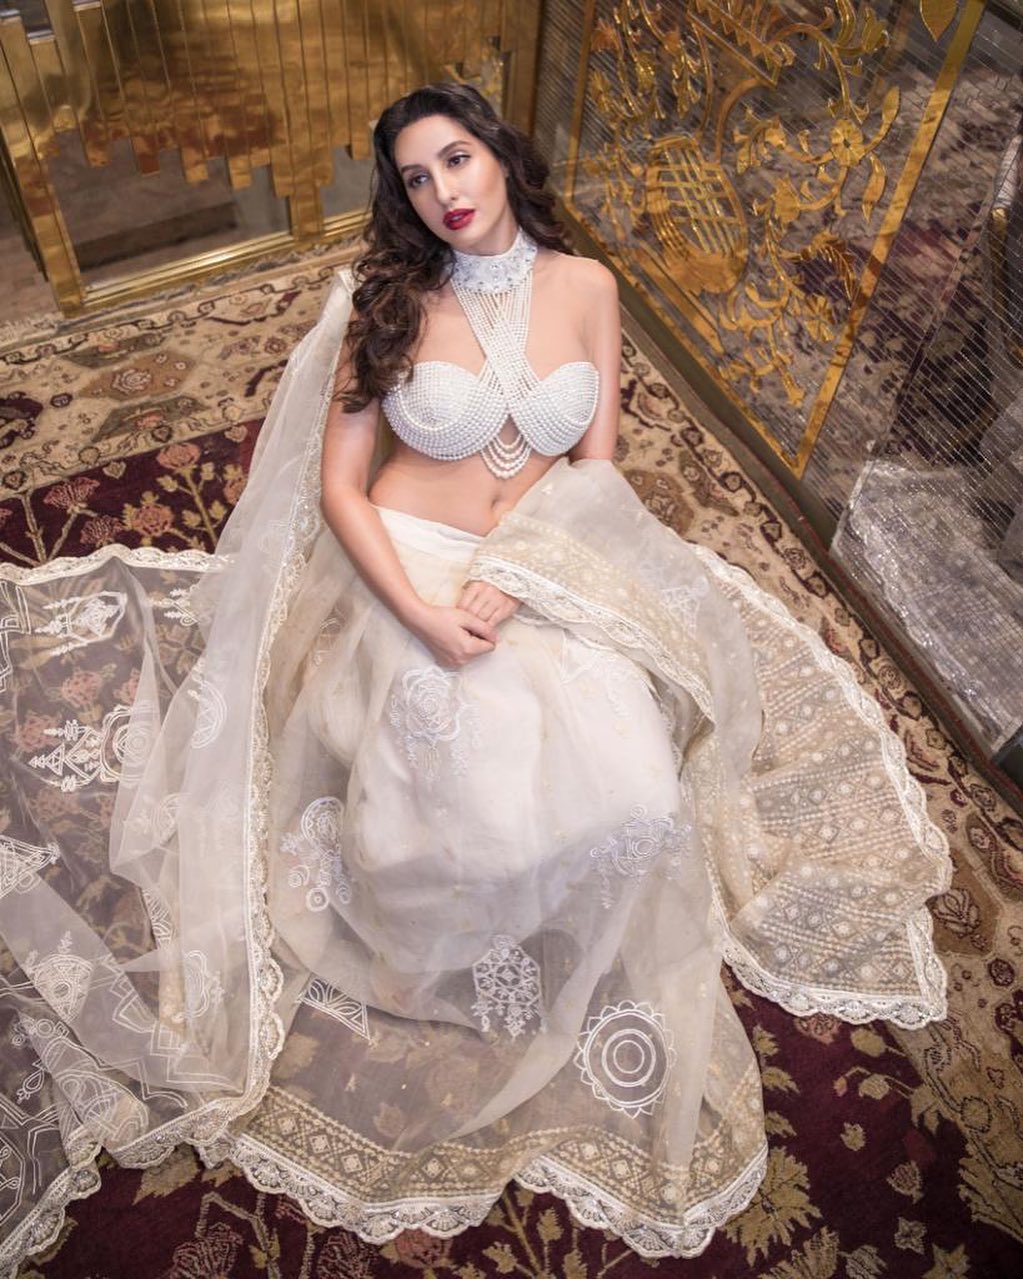  Nora Fatehi looks like a million bucks in anything she wears. Her ethnic wear looks are definitely some of her best. Scroll ahead as we round up some of her most gorgeous photos in sarees and lehengas. Pictured above, the actress looks sensational in the white saree. (Image: Instagram)